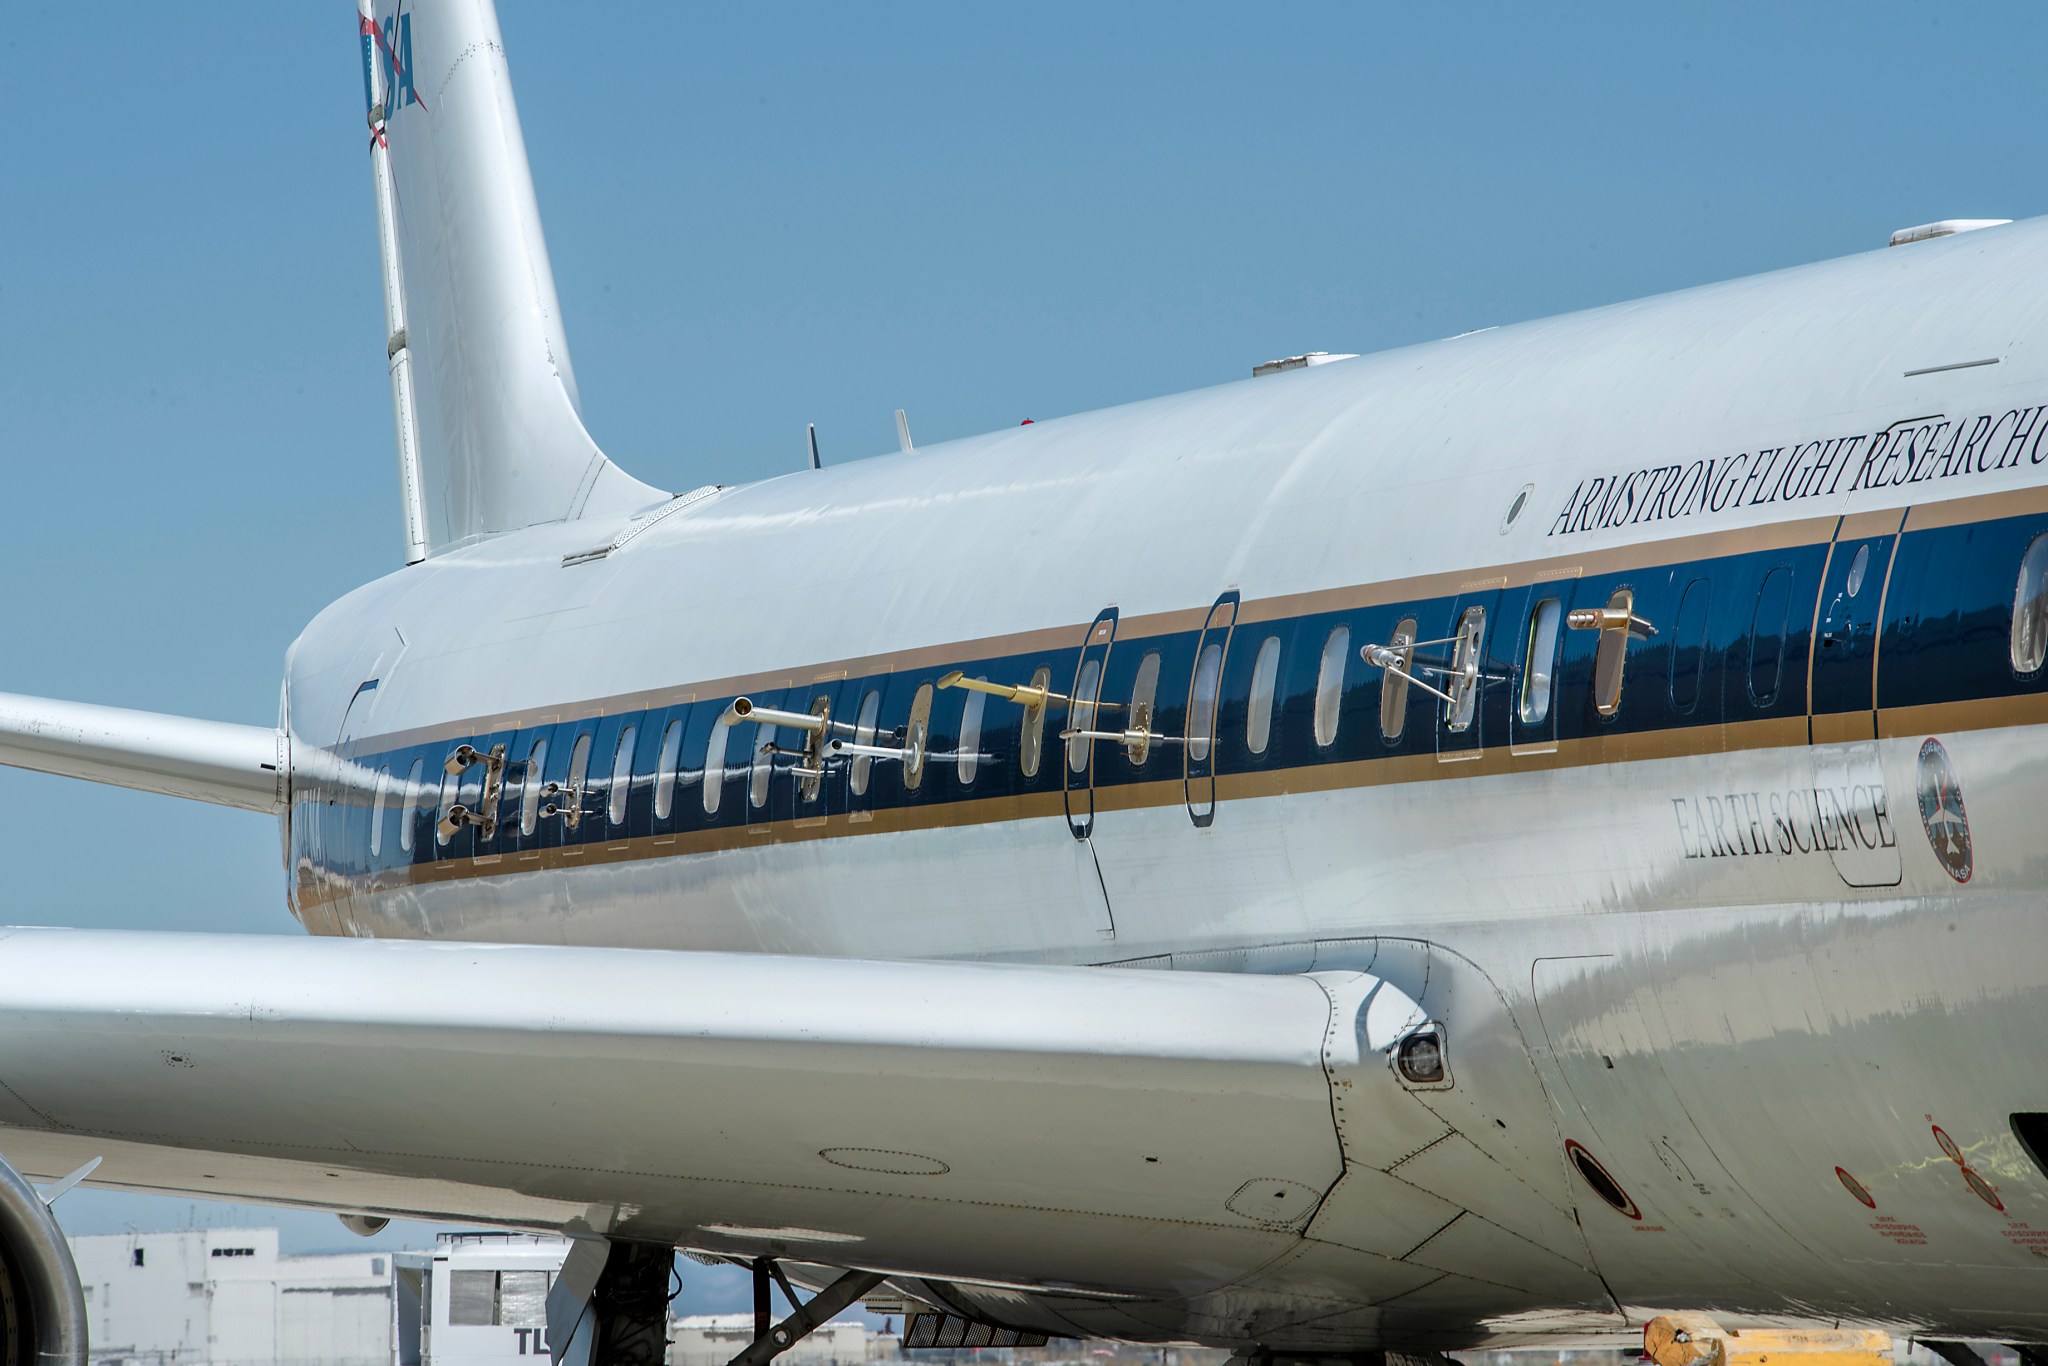 The side of NASA's DC-8 plane, with small gold and silver intake valves poking out of the side windows.